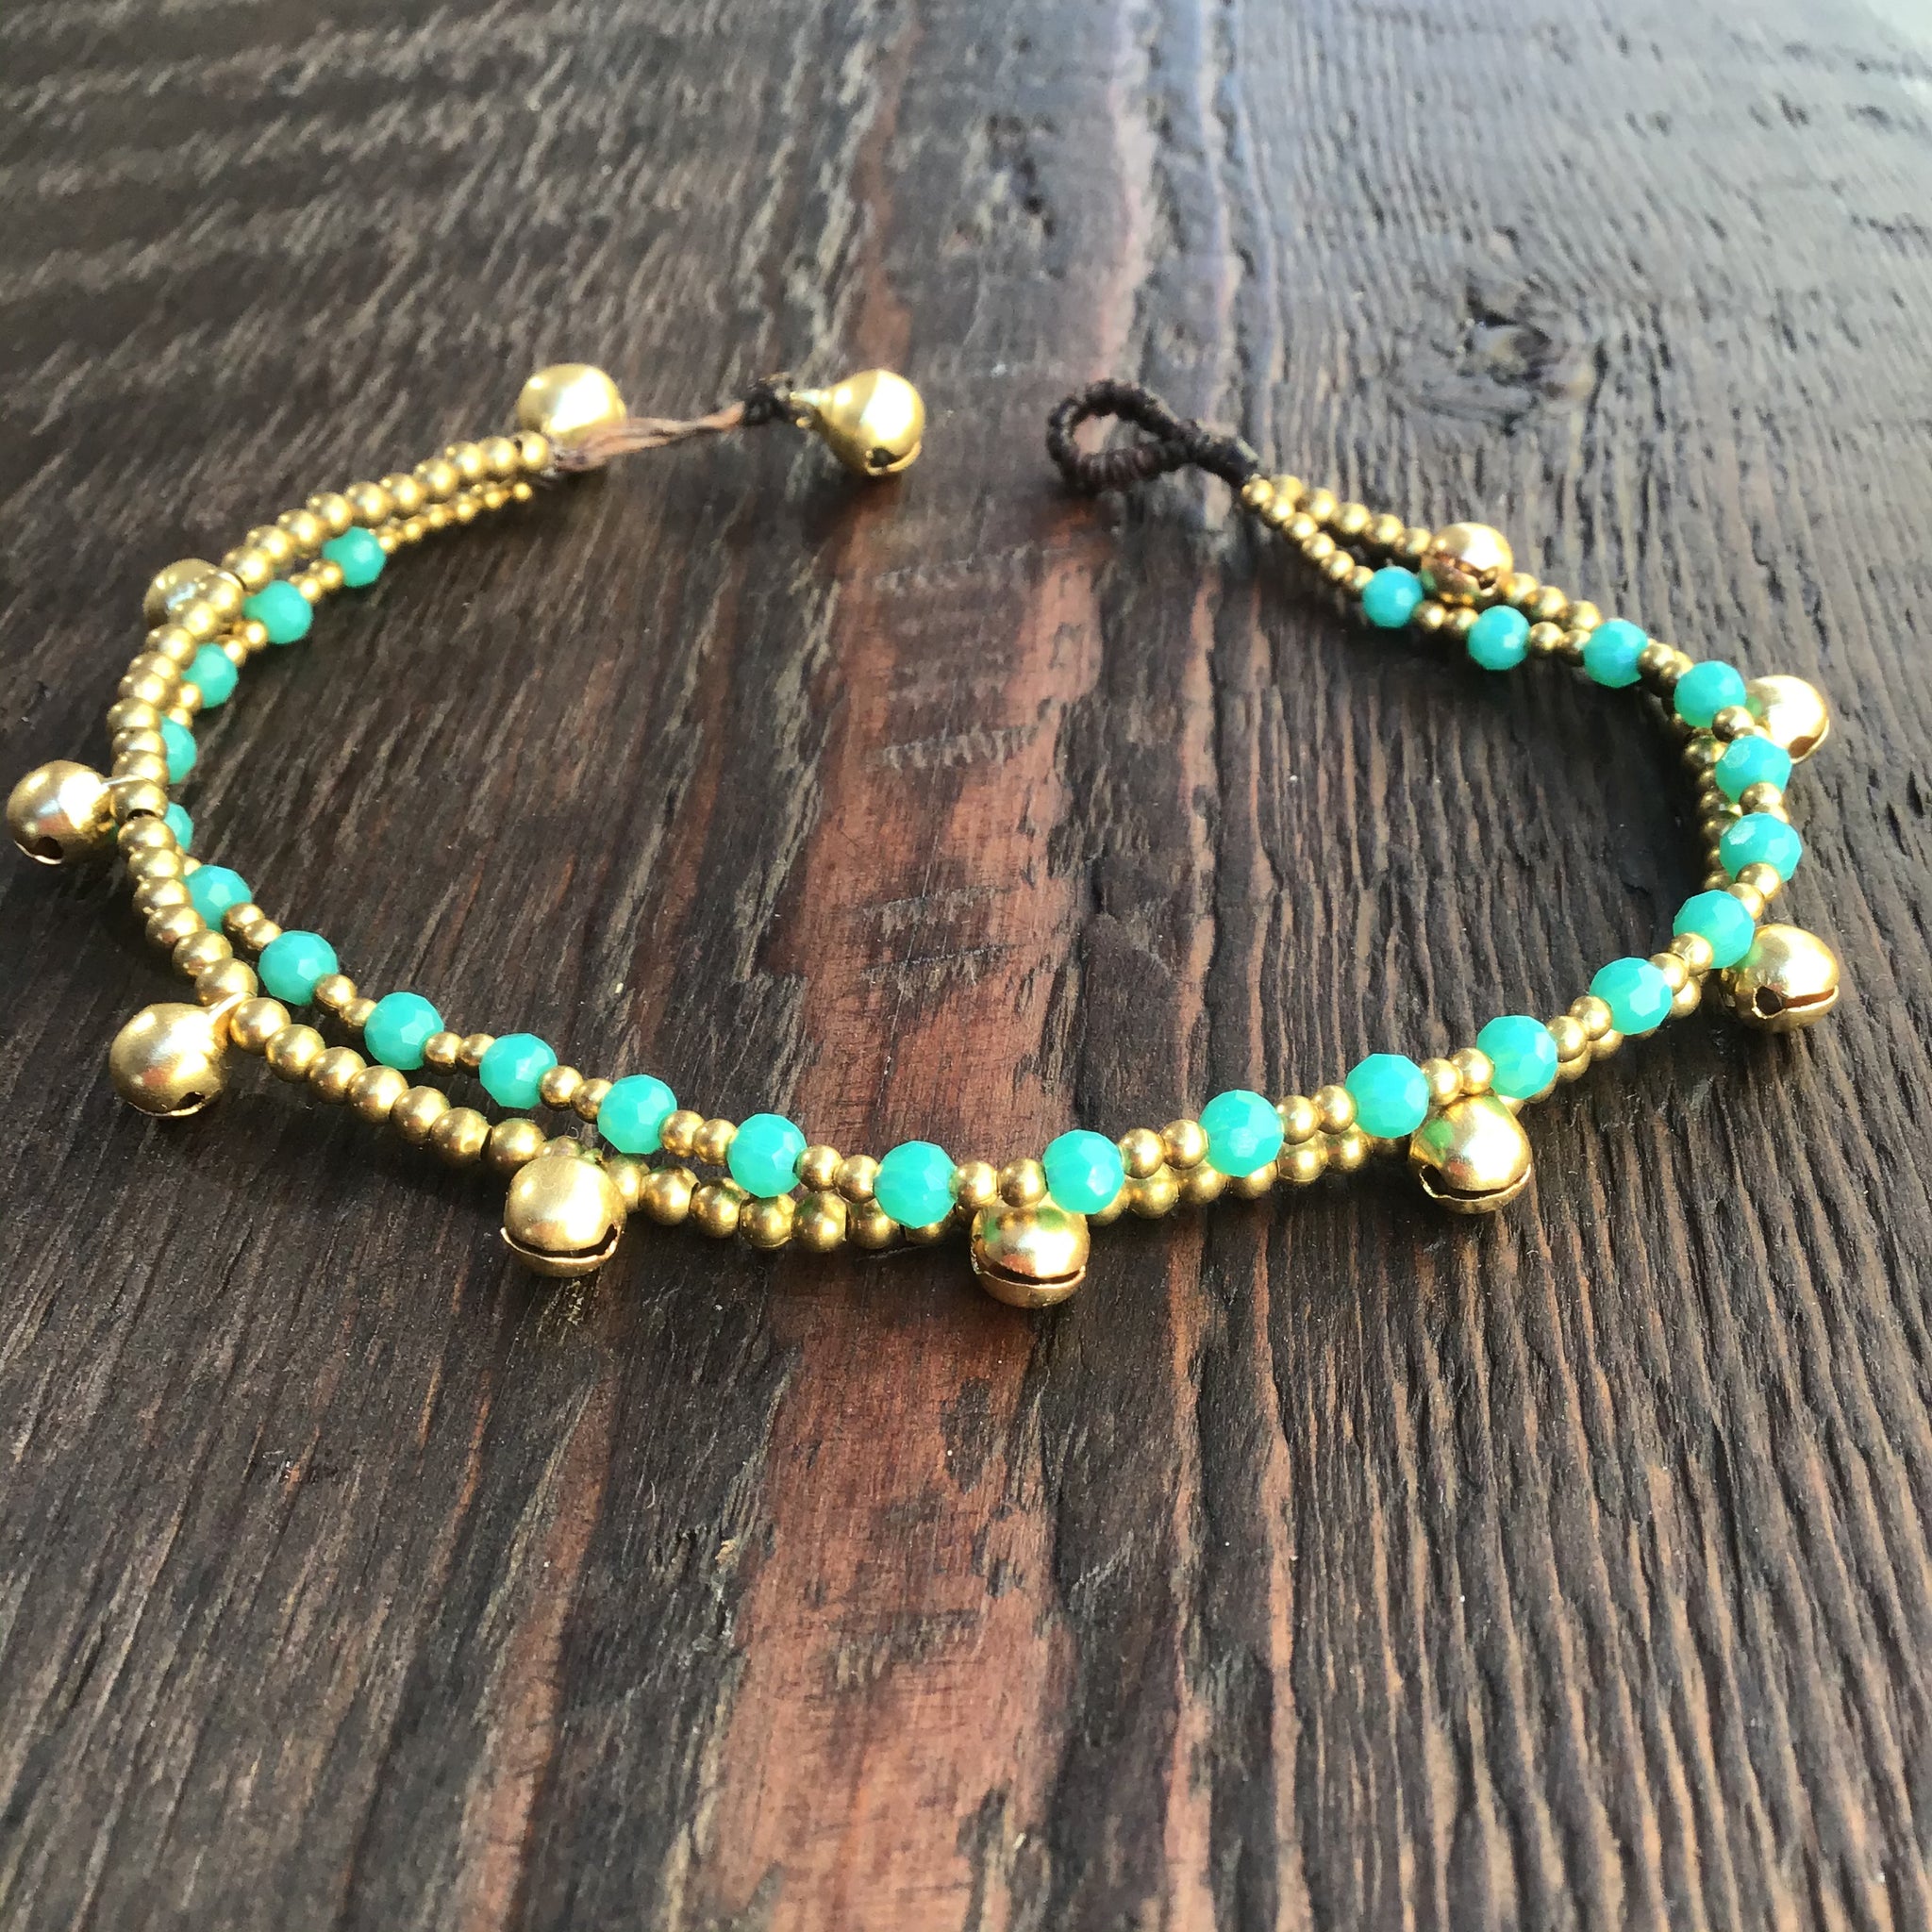 ‘Bead Love' 2 Strand Anklet with Faceted Beads (Green Turquoise)